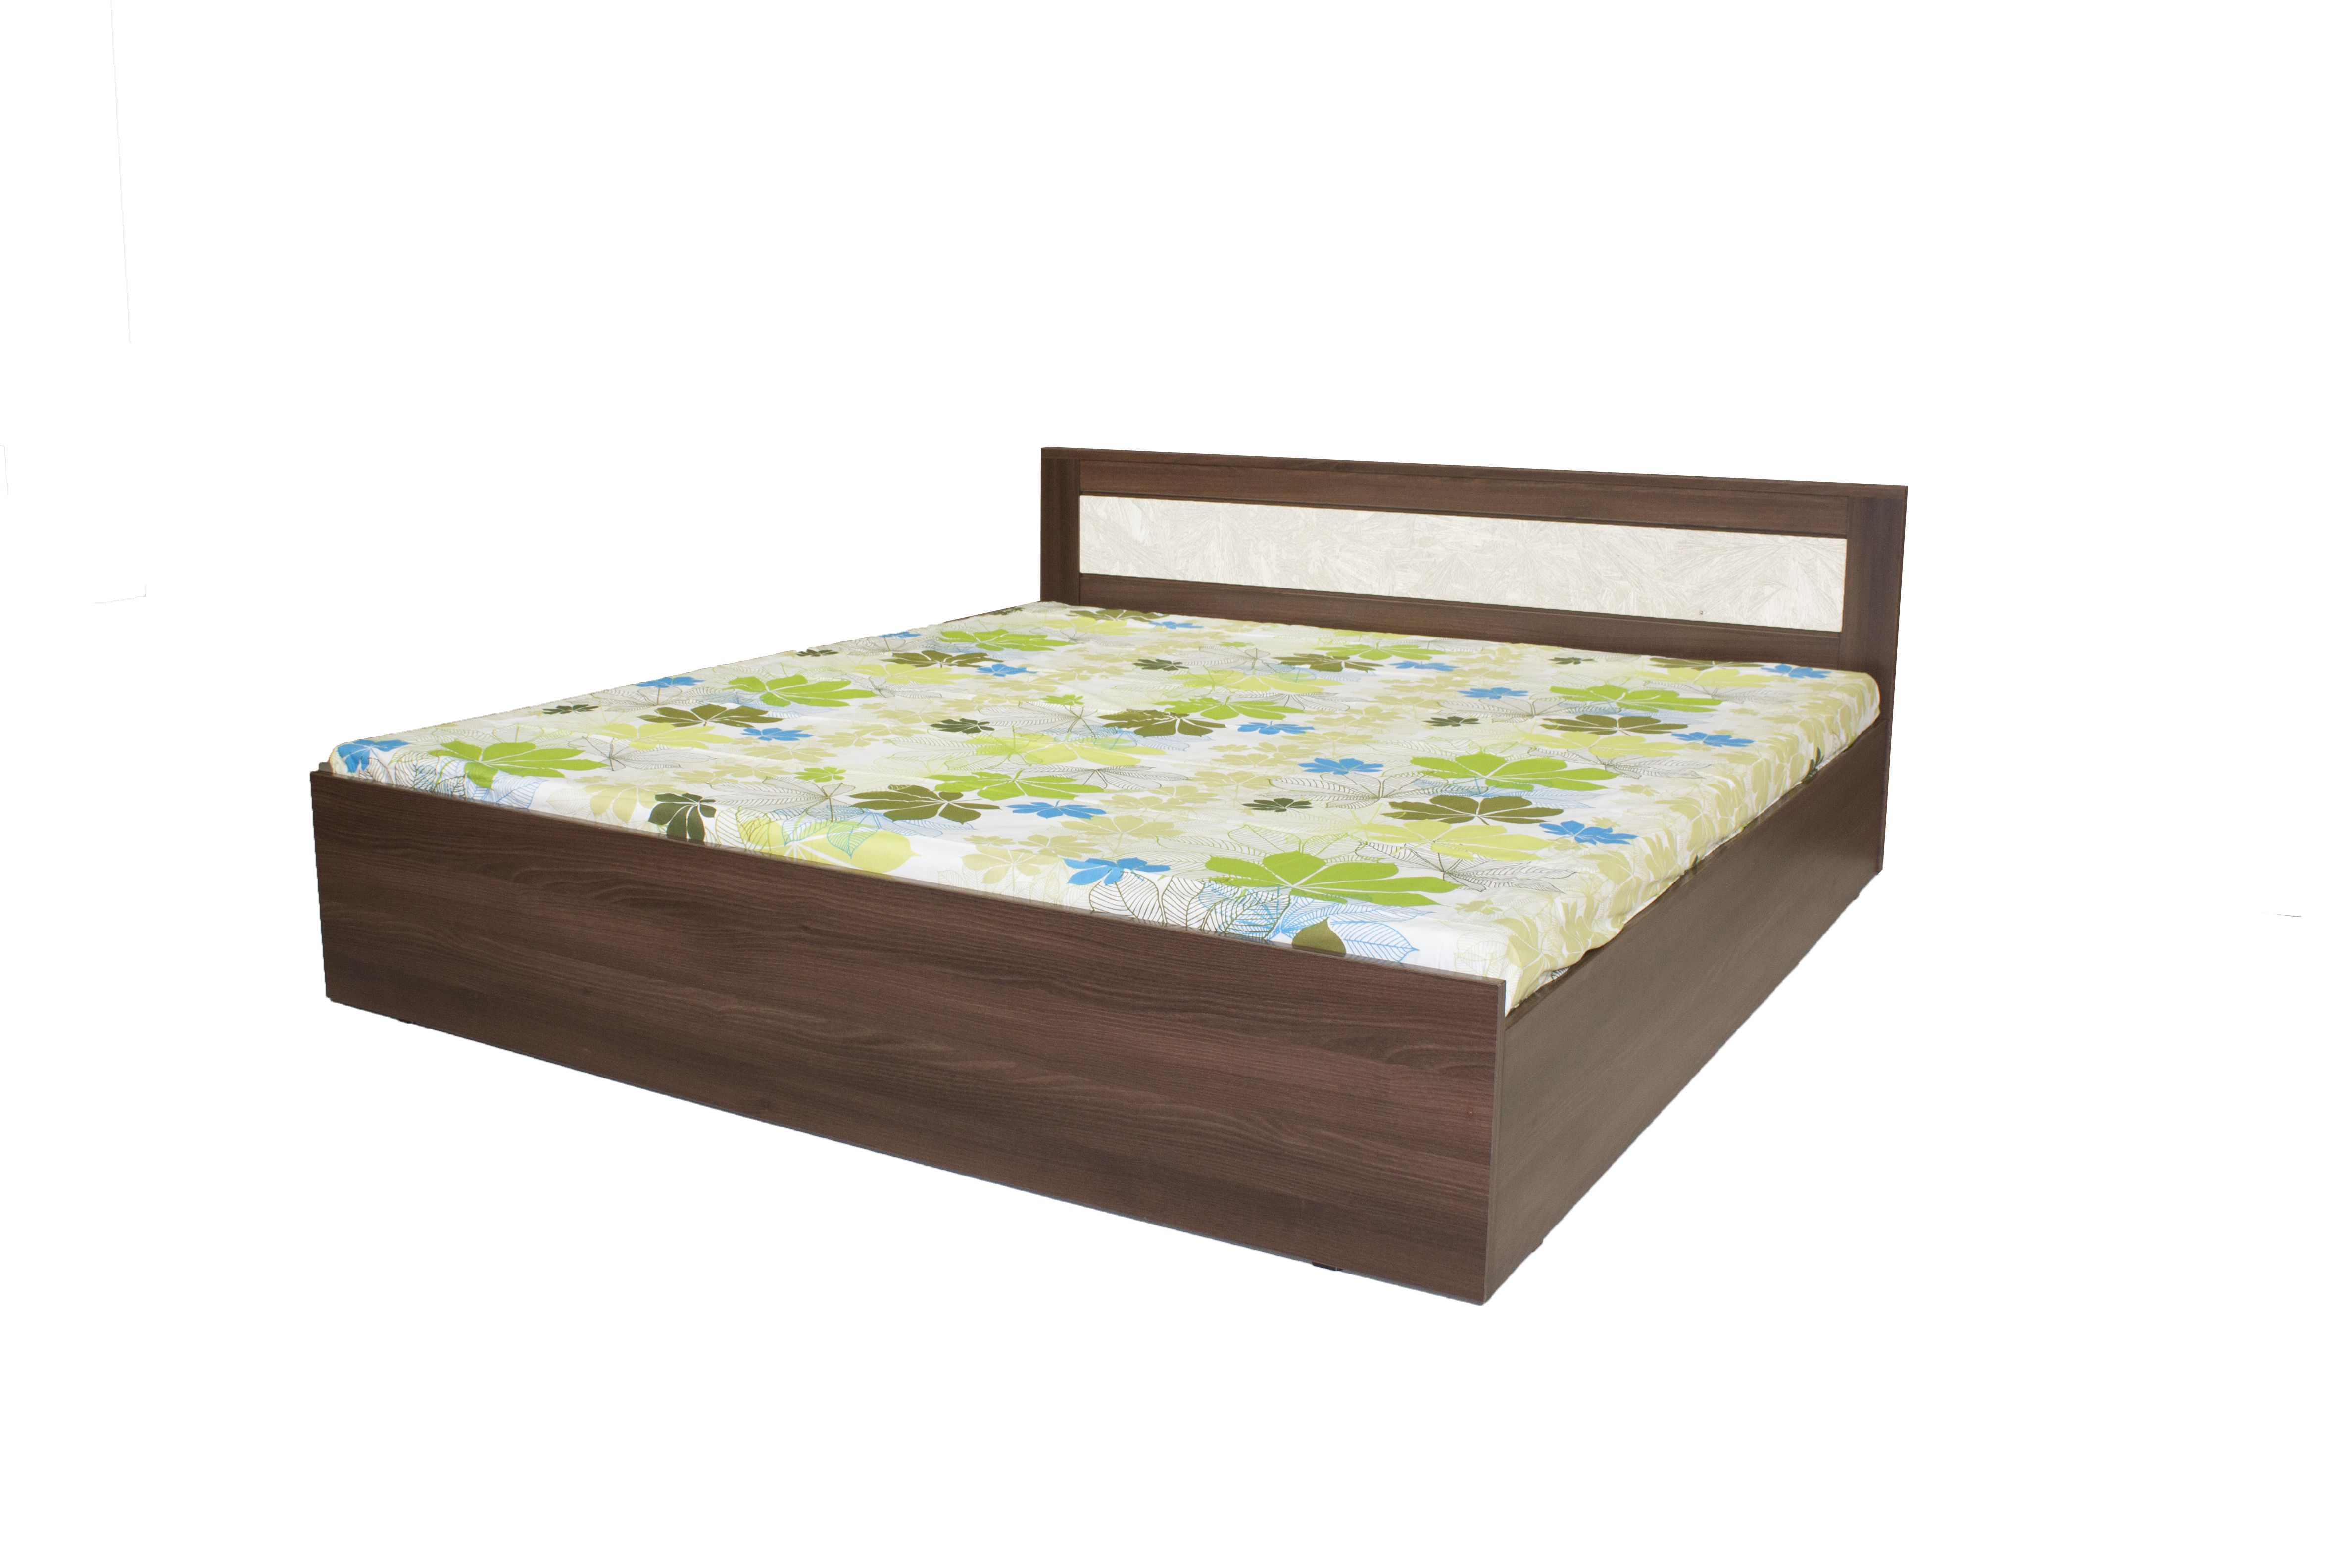 Crystal Furnitech Dylan King Size Storage Bed Buy Crystal Furnitech Dylan King Size Storage Bed line at Best Prices in India on Snapdeal